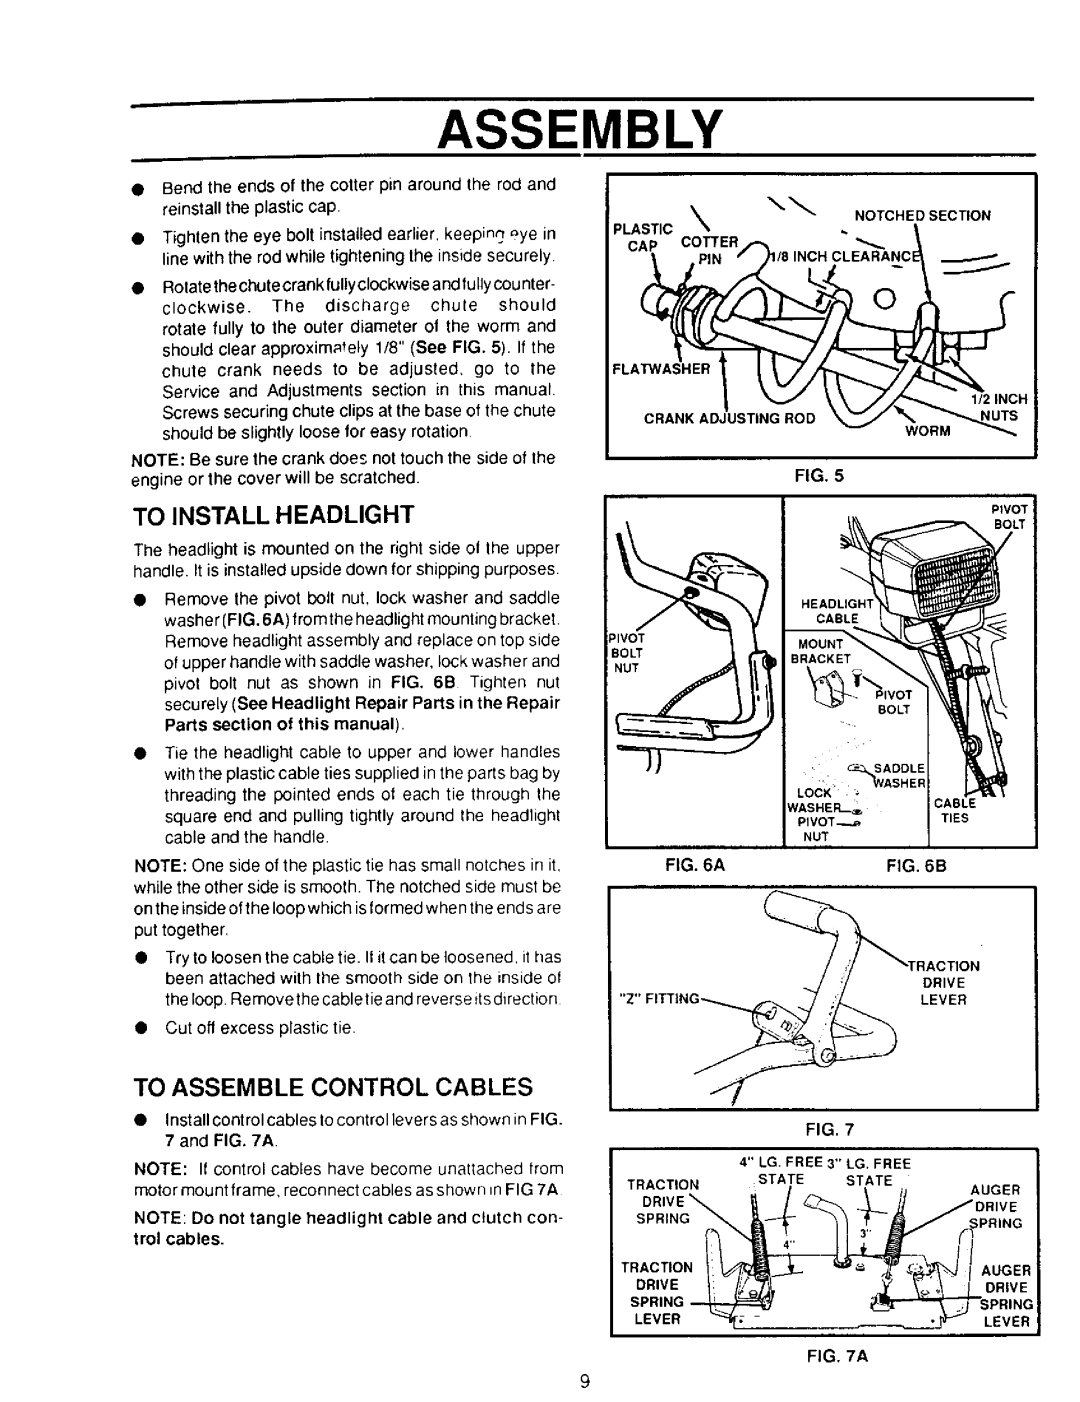 Sears 536.886331 owner manual To Install Headlight, Plastic, Notchedsection, To Assemble Control Cables, Assembly 